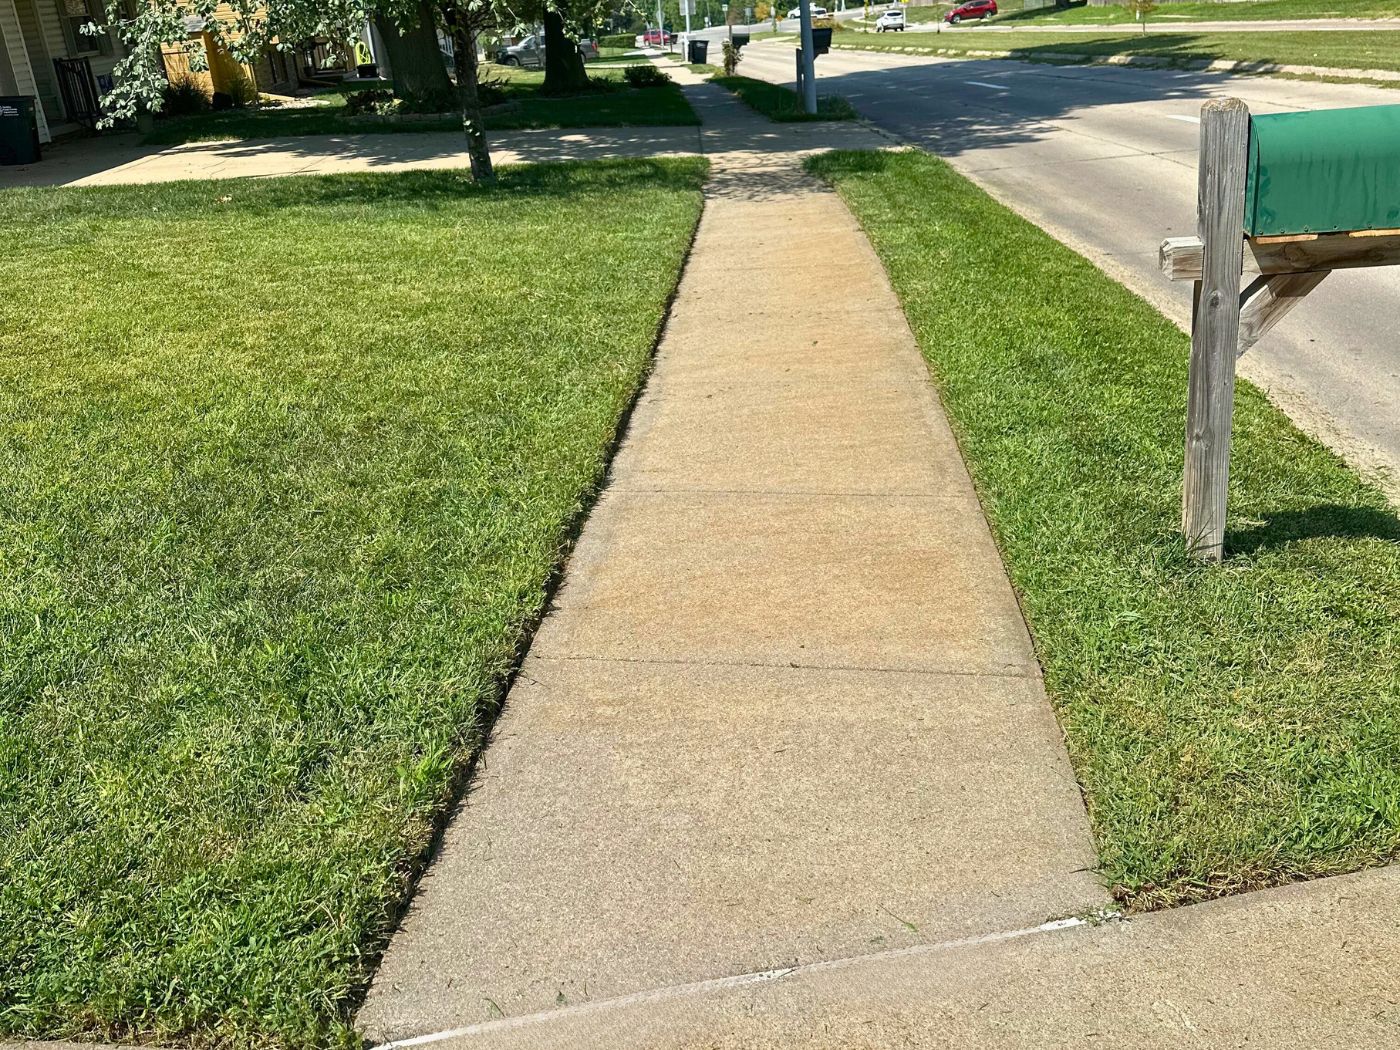 Image of a sidewalk with the grass cut and neatly edged on both sides.